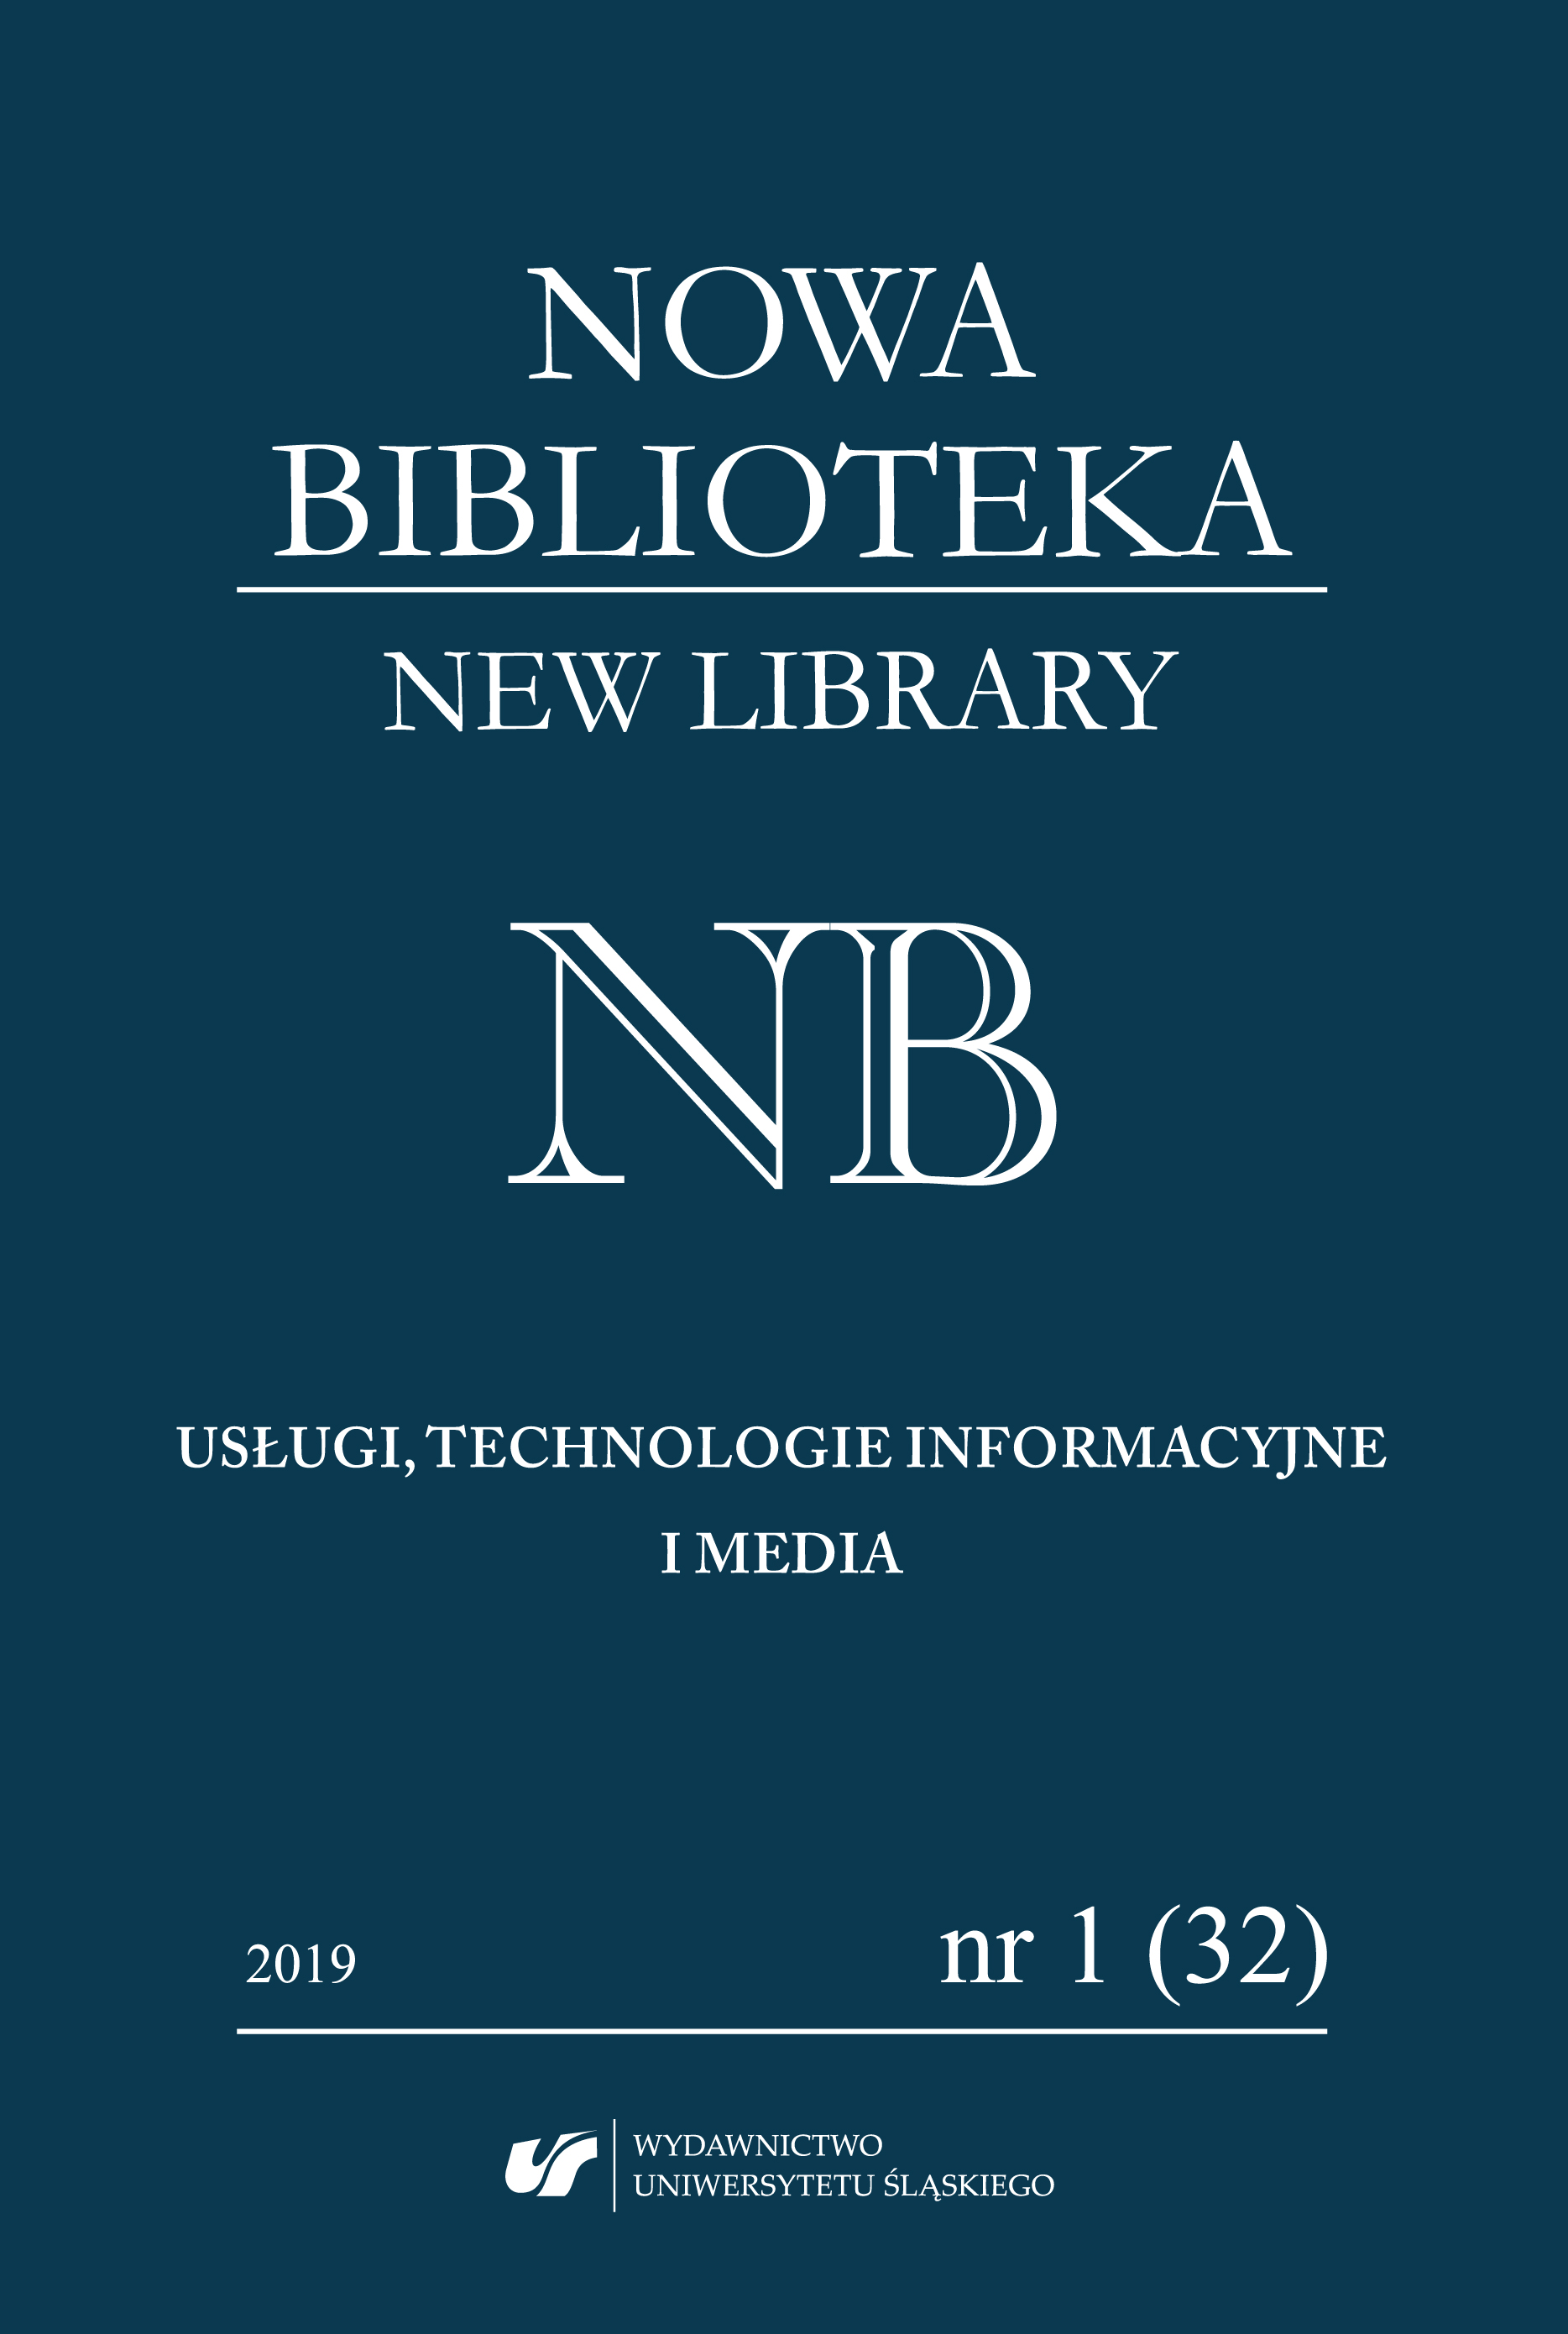 XXXIX Forum of the Section of Libraries of Schools of Higher Education of the Association of Polish Librarians – “A library for teaching-related activities II” (Chorzów, 11 June 2018) Cover Image